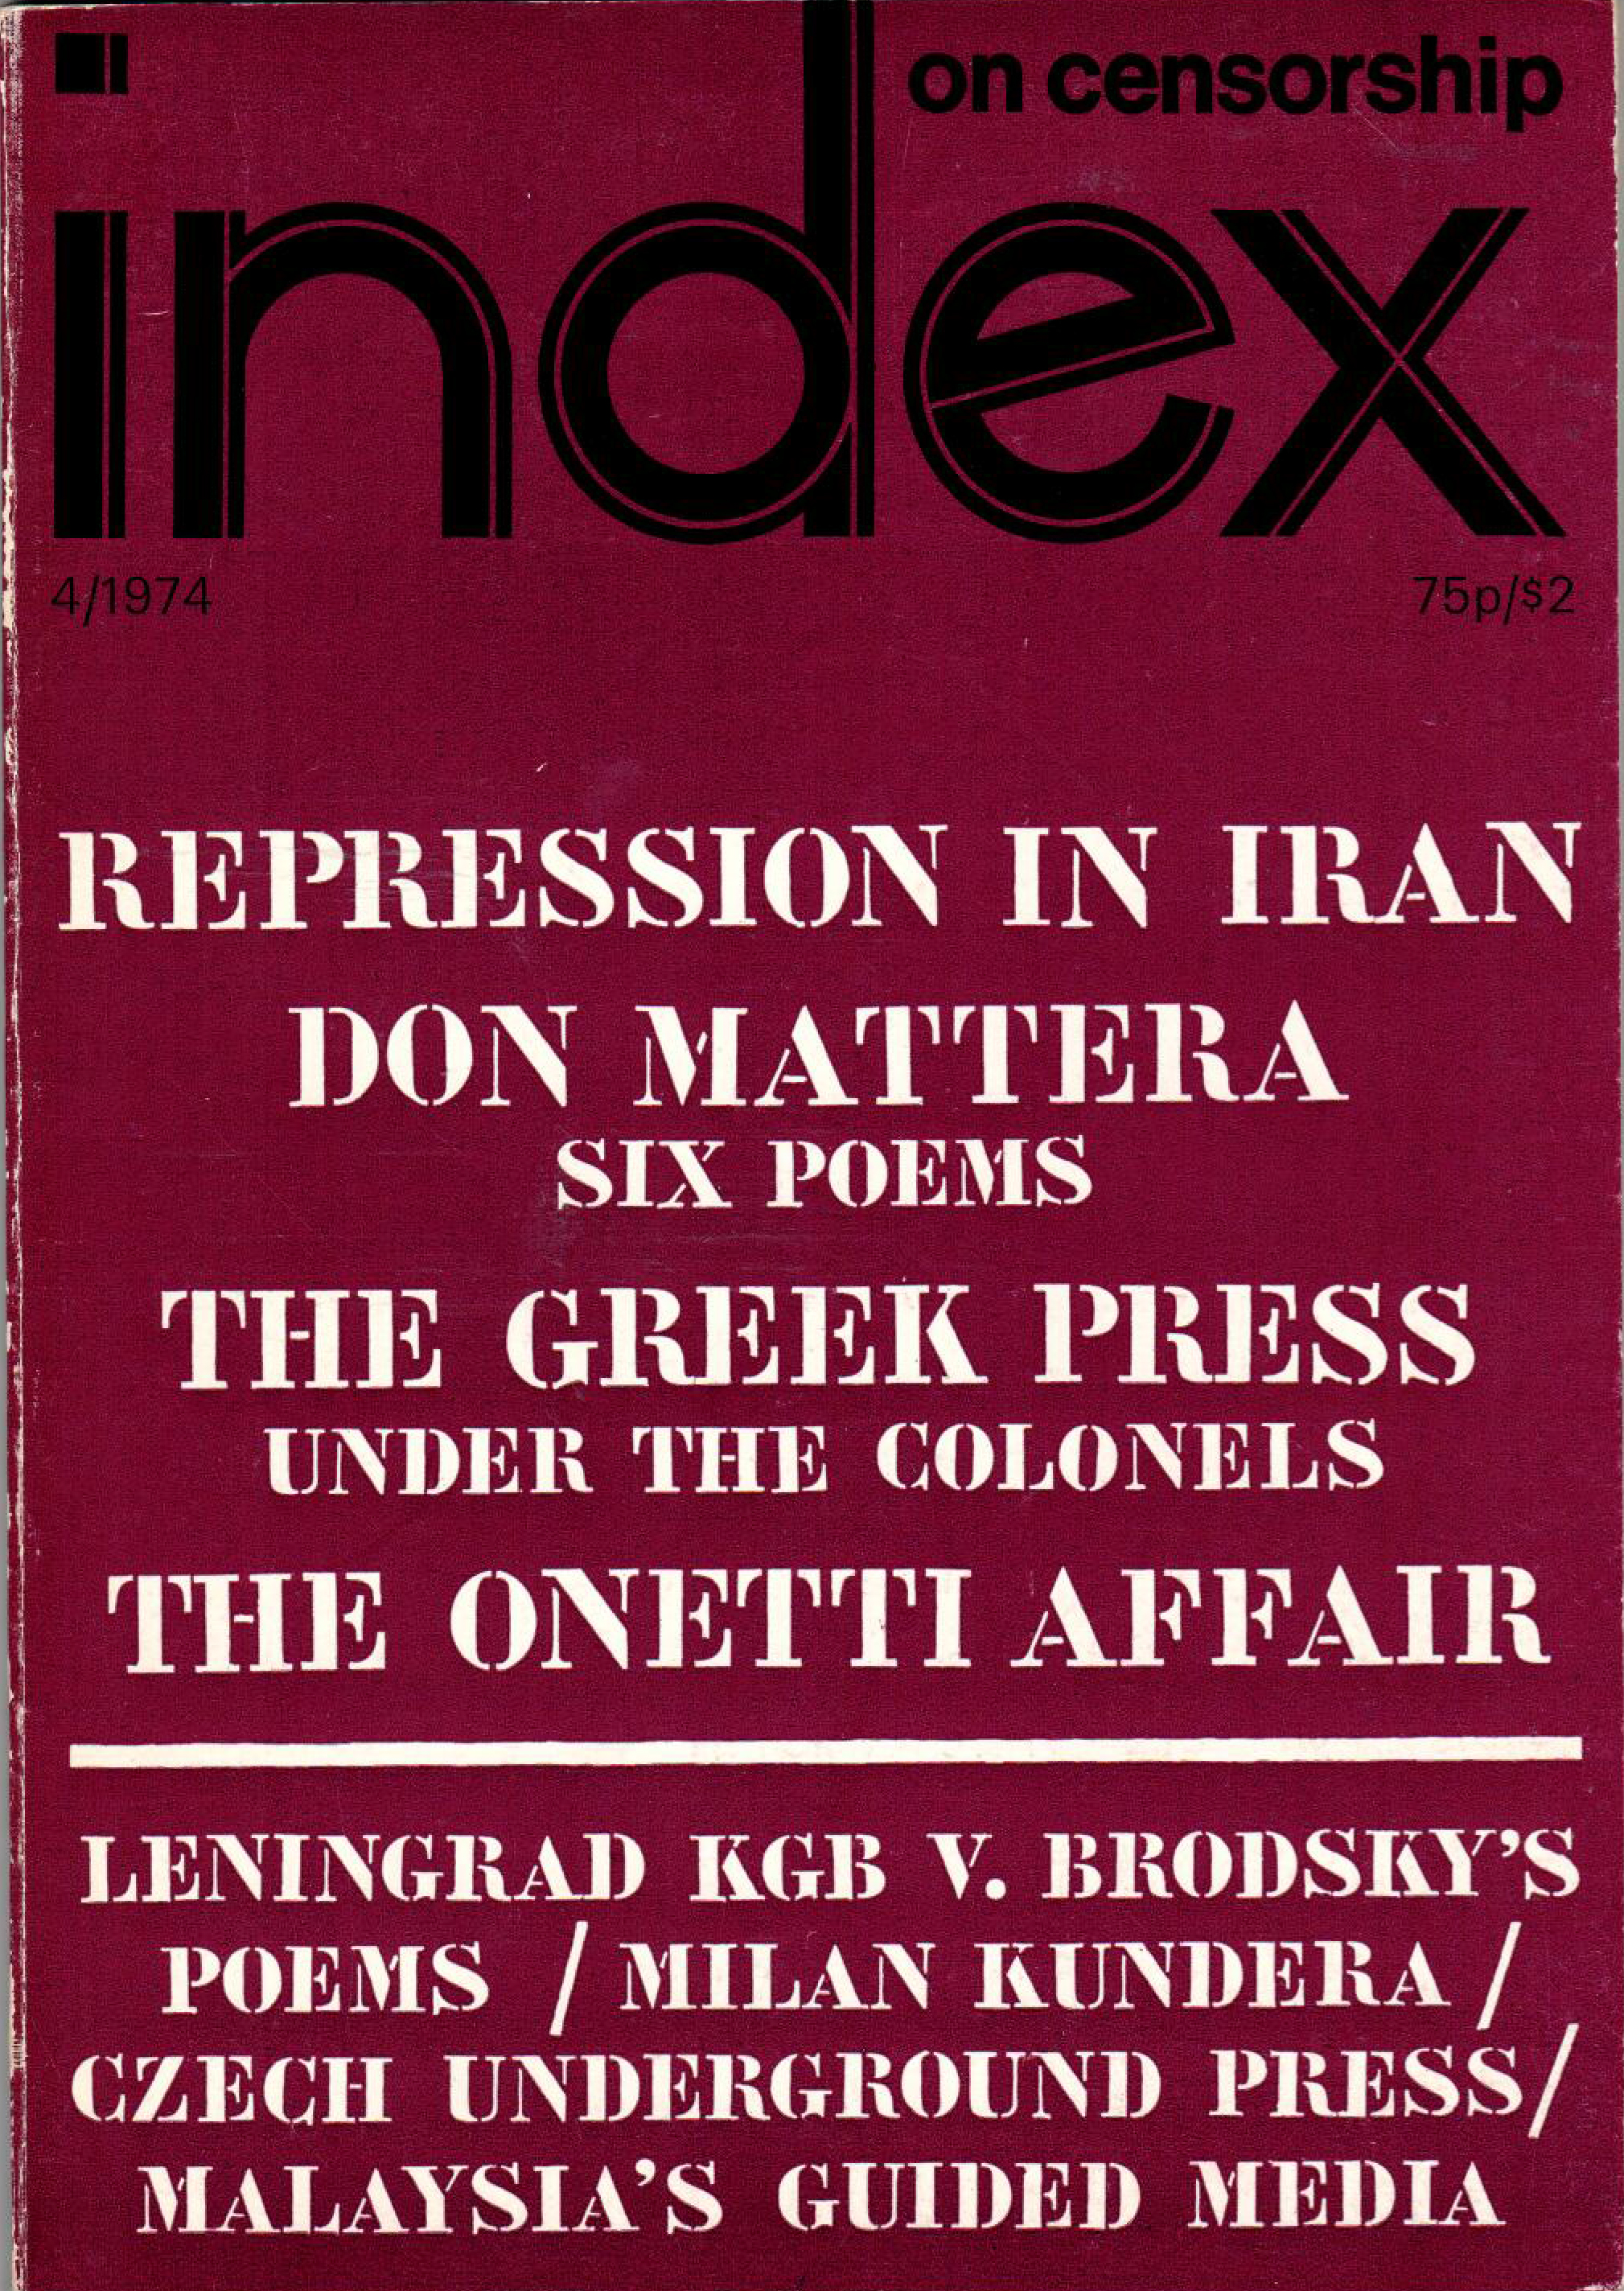 Repression in Iran , the Winter 1974 issue of Index on Censorship magazine